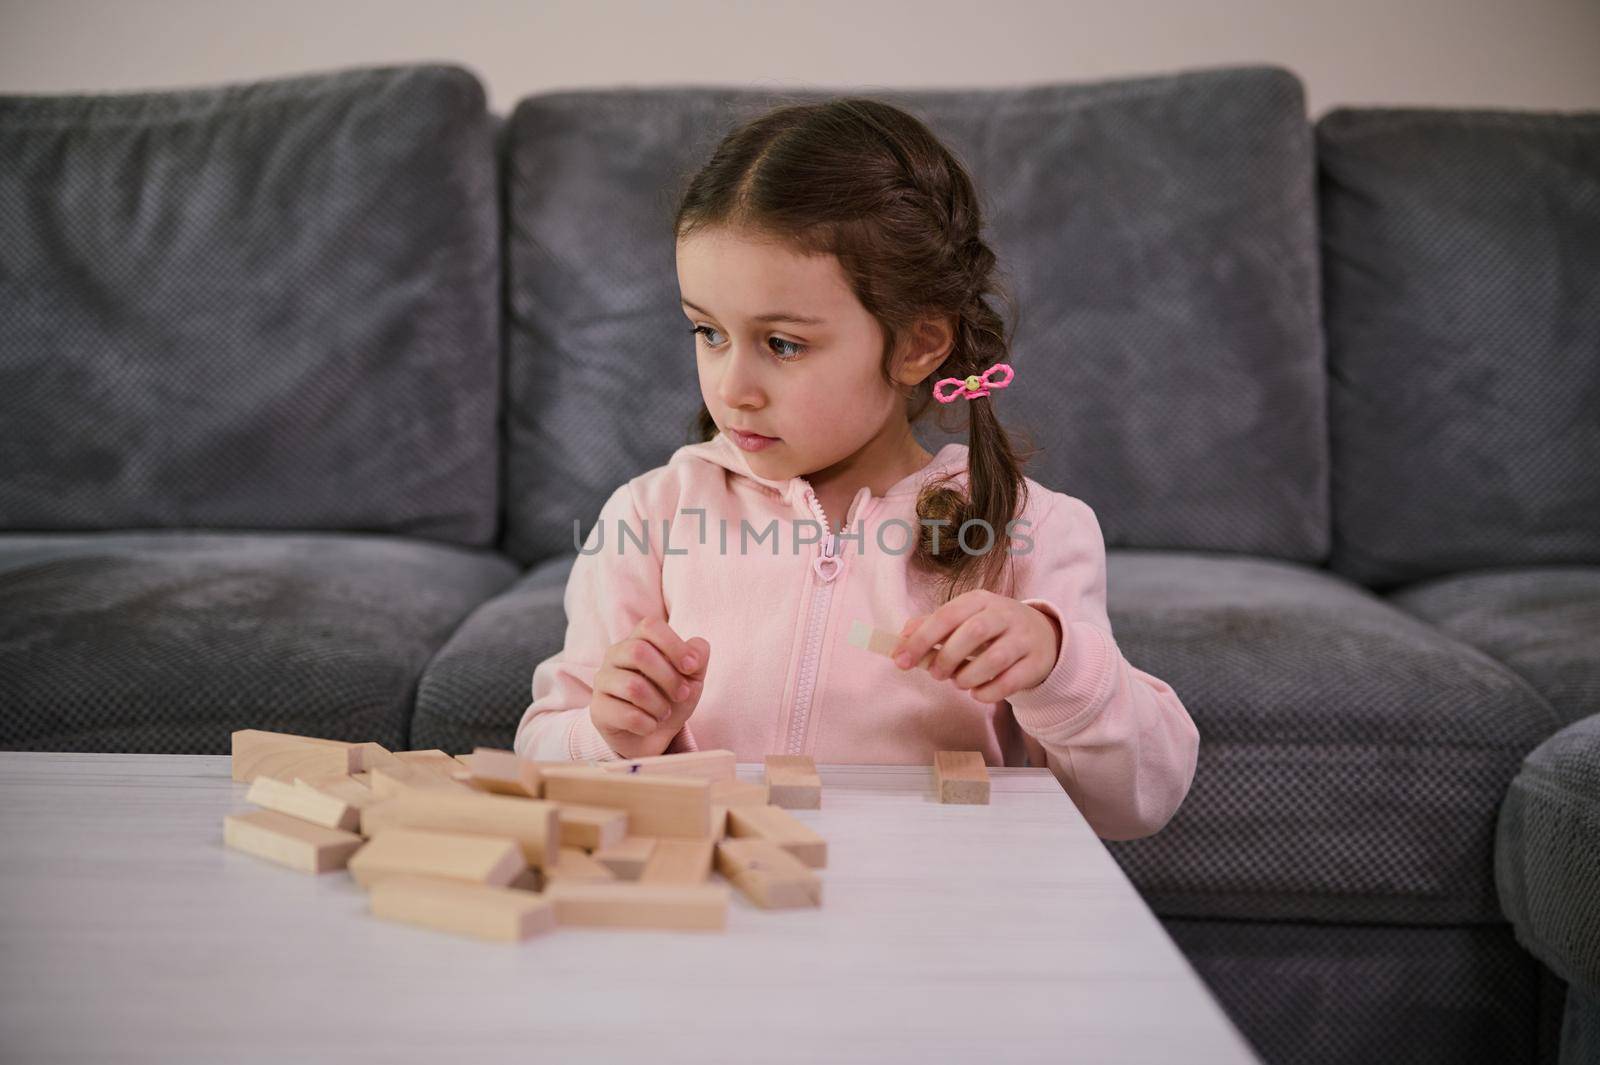 Education, development of fine motor skills, developmental board games concept. Adorable Caucasian girl focused on building with wooden bricks blocks, sitting at a table in the home living room